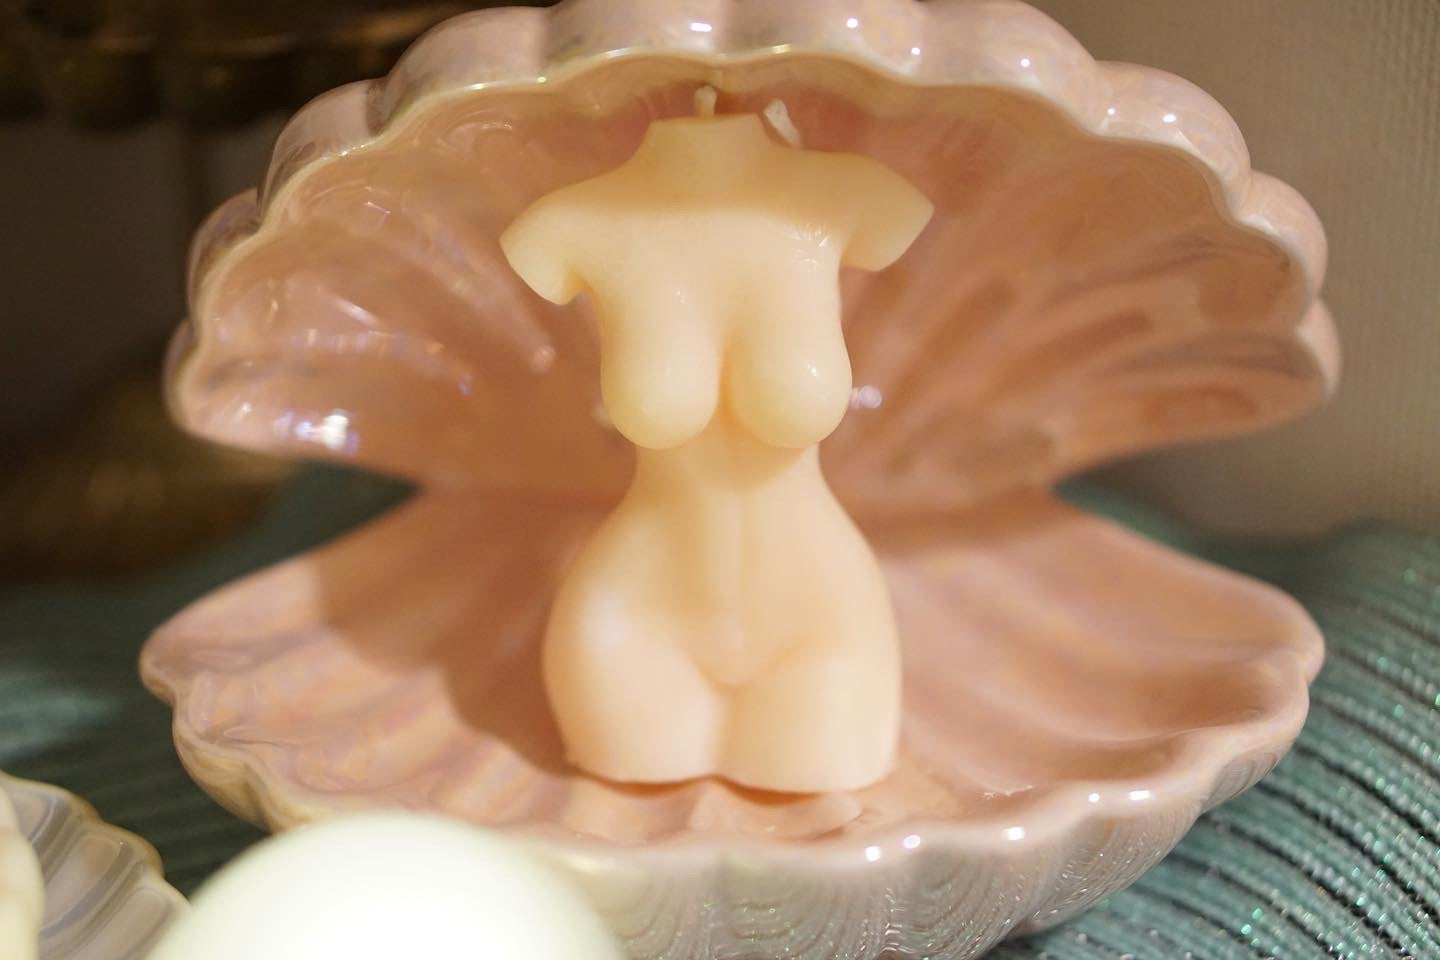 Female Candle, Scented Venus Bust Candles, Woman Body Candles, Naked Candles  │ Kawaii Candle